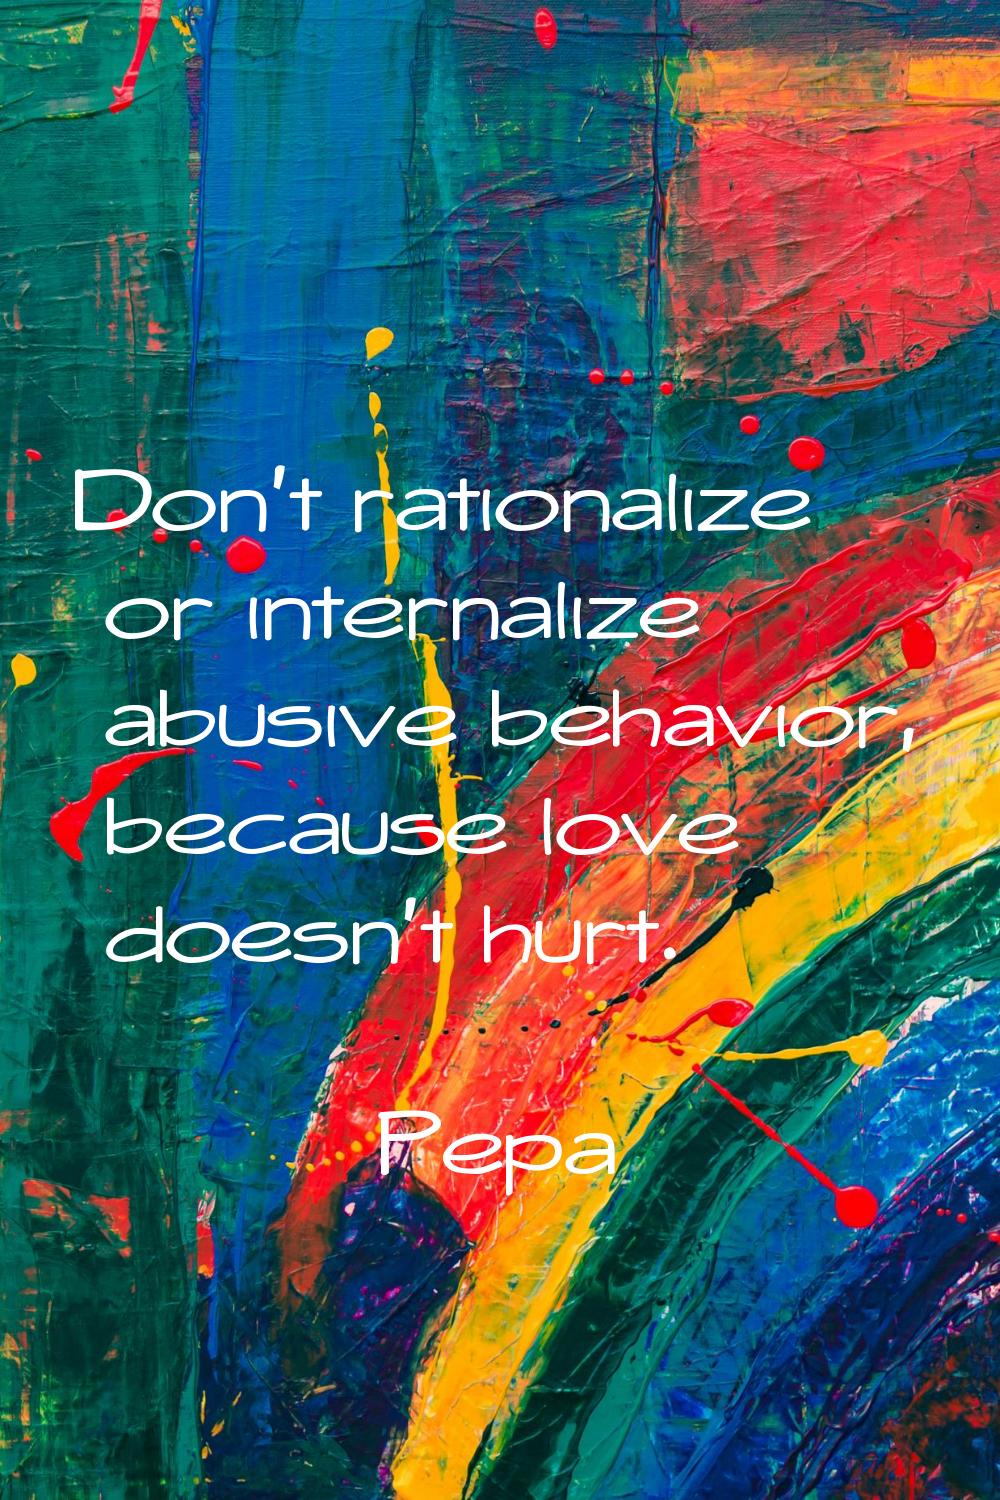 Don't rationalize or internalize abusive behavior, because love doesn't hurt.